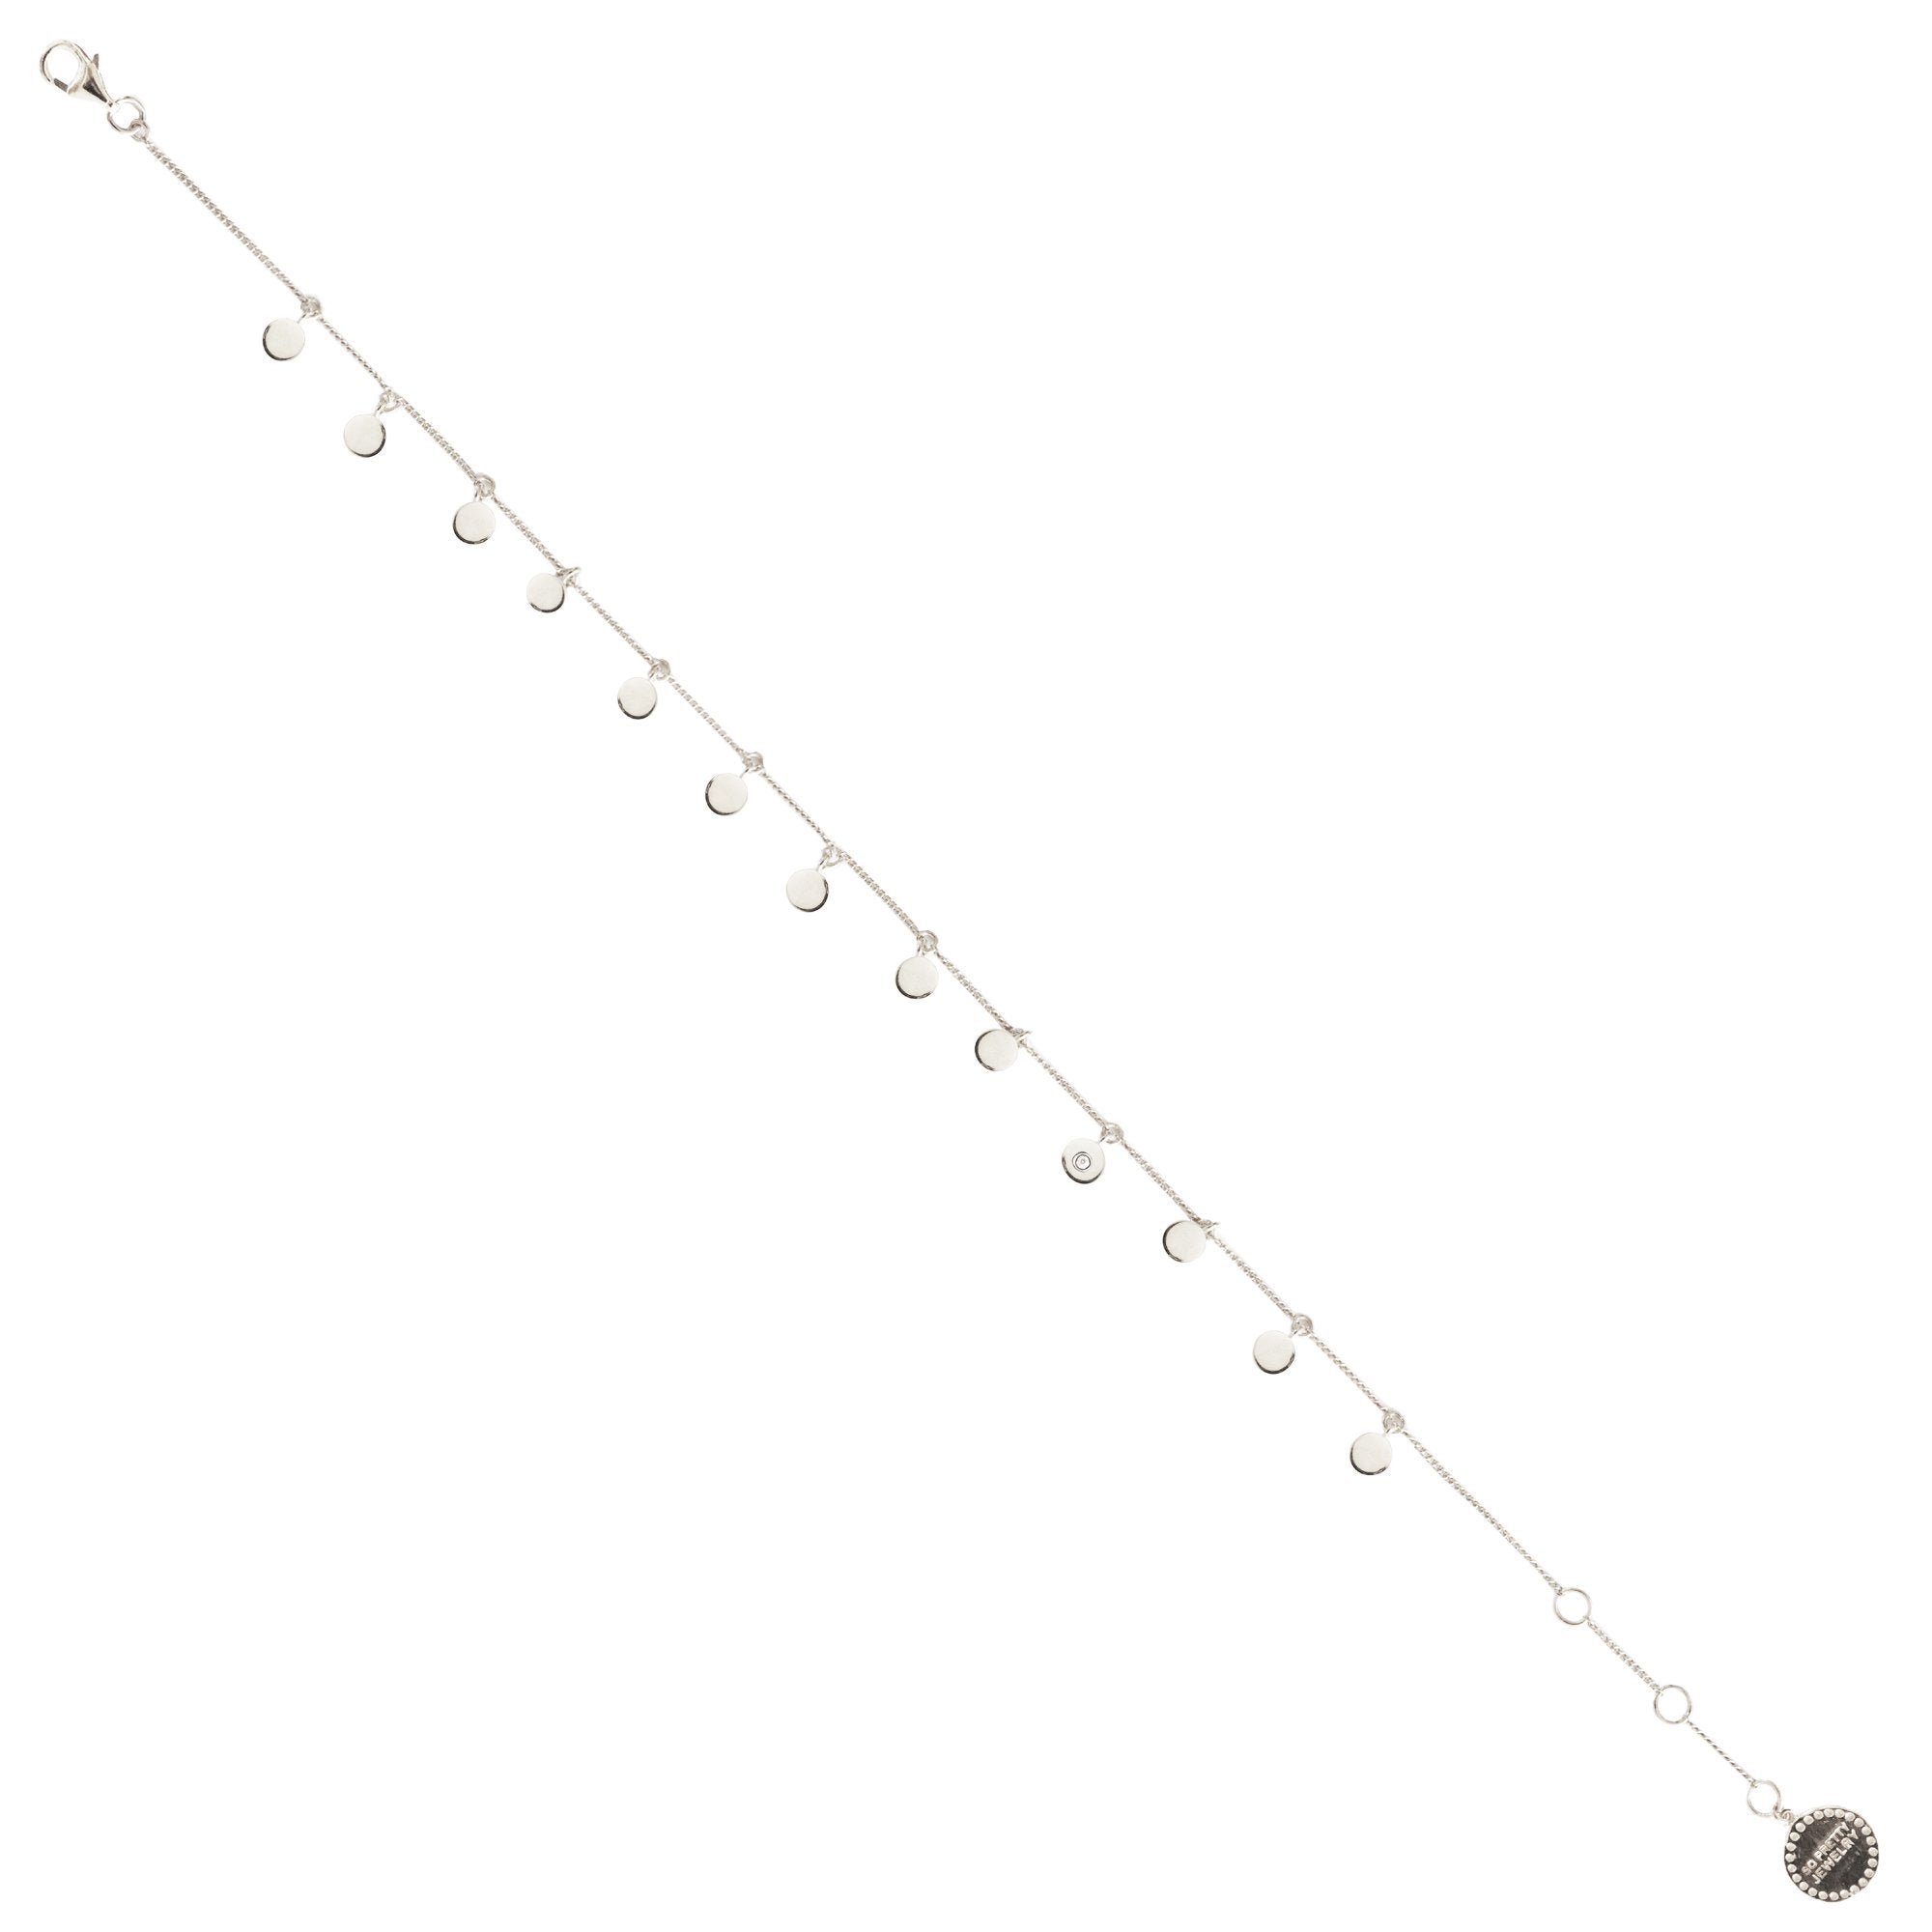 POISE DISK ANKLET - STERLING SILVER - SO PRETTY CARA COTTER